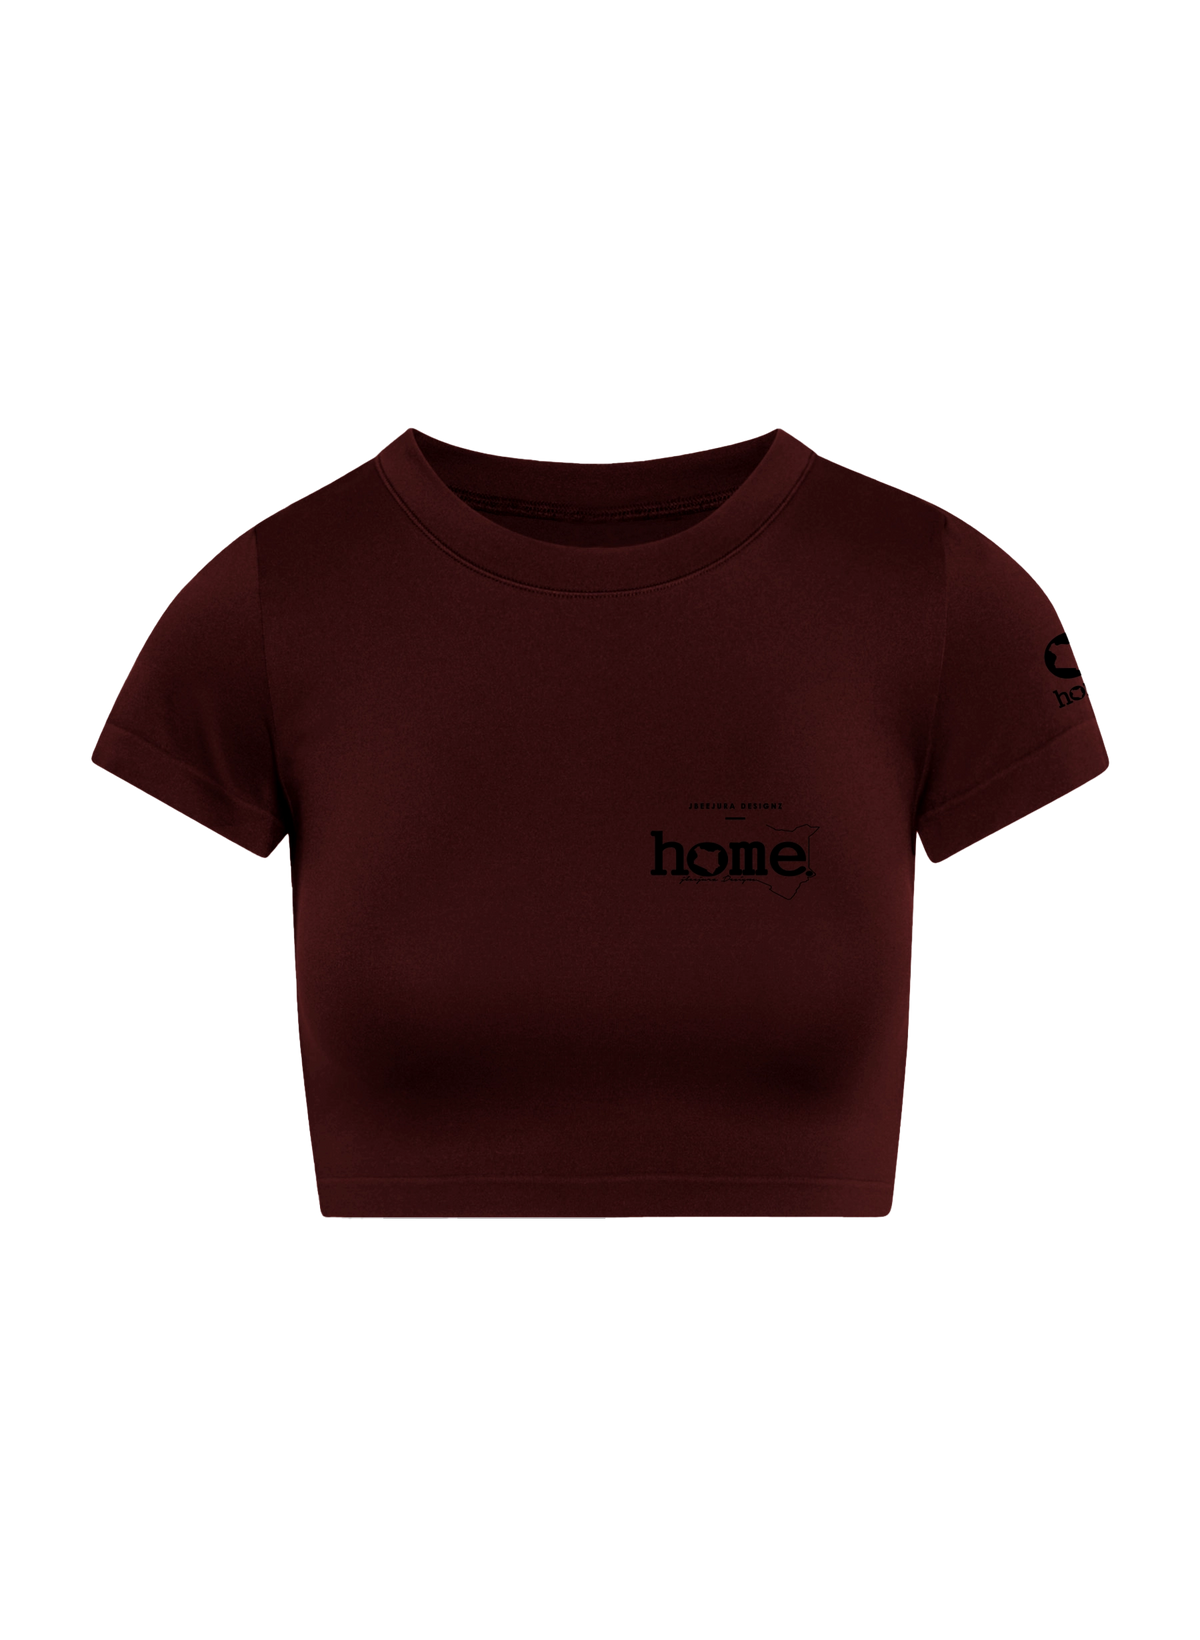 home_254 SHORT SLEEVED MAROON CROPPED ARIA TEE WITH A BLACK 3D WORDS PRINT 